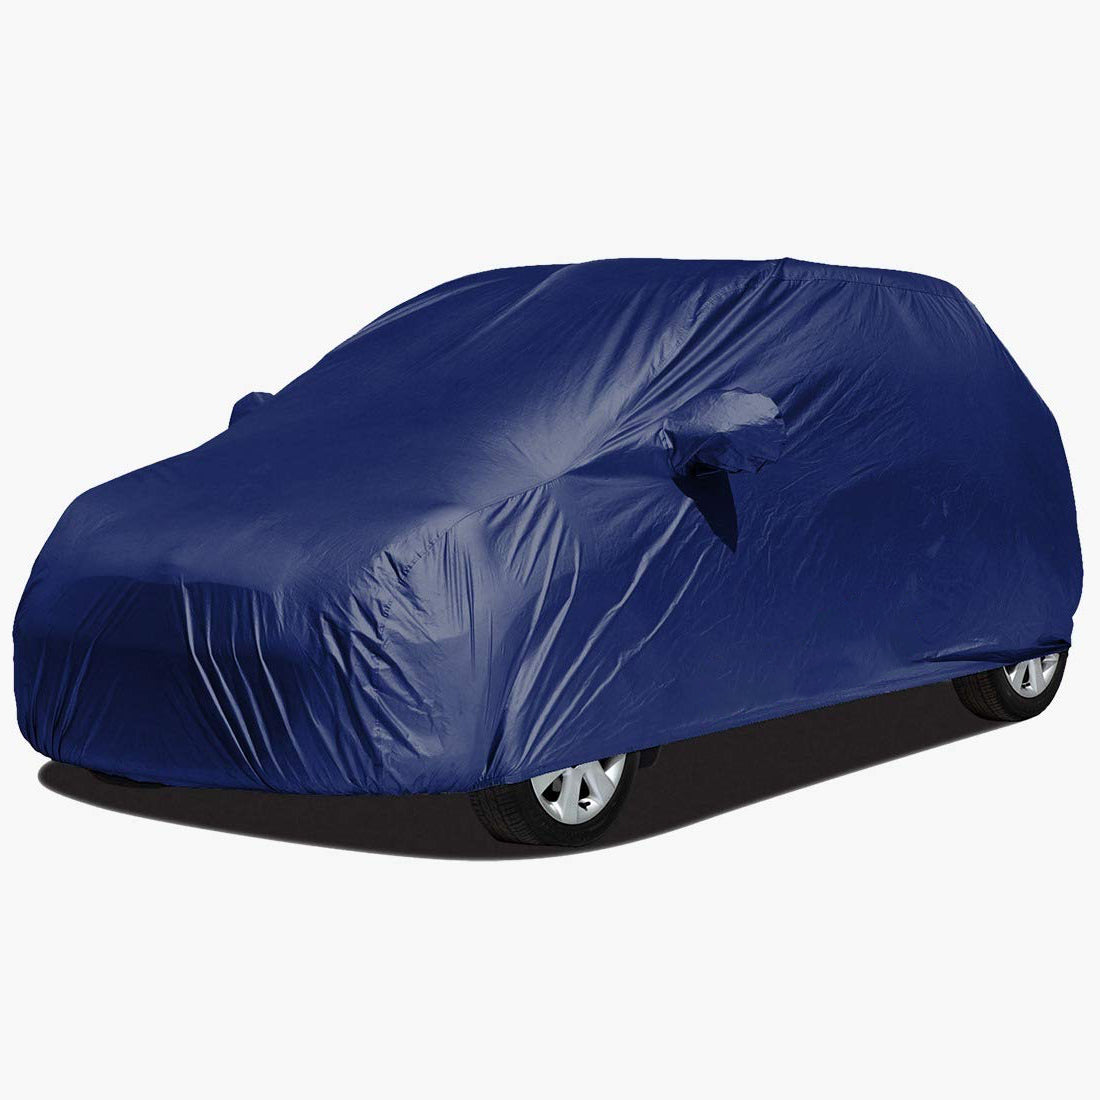 Hyundai Venue (2019-2022) Car Body Cover, Heat & Water Resistant, Dustproof without side mirror pockets